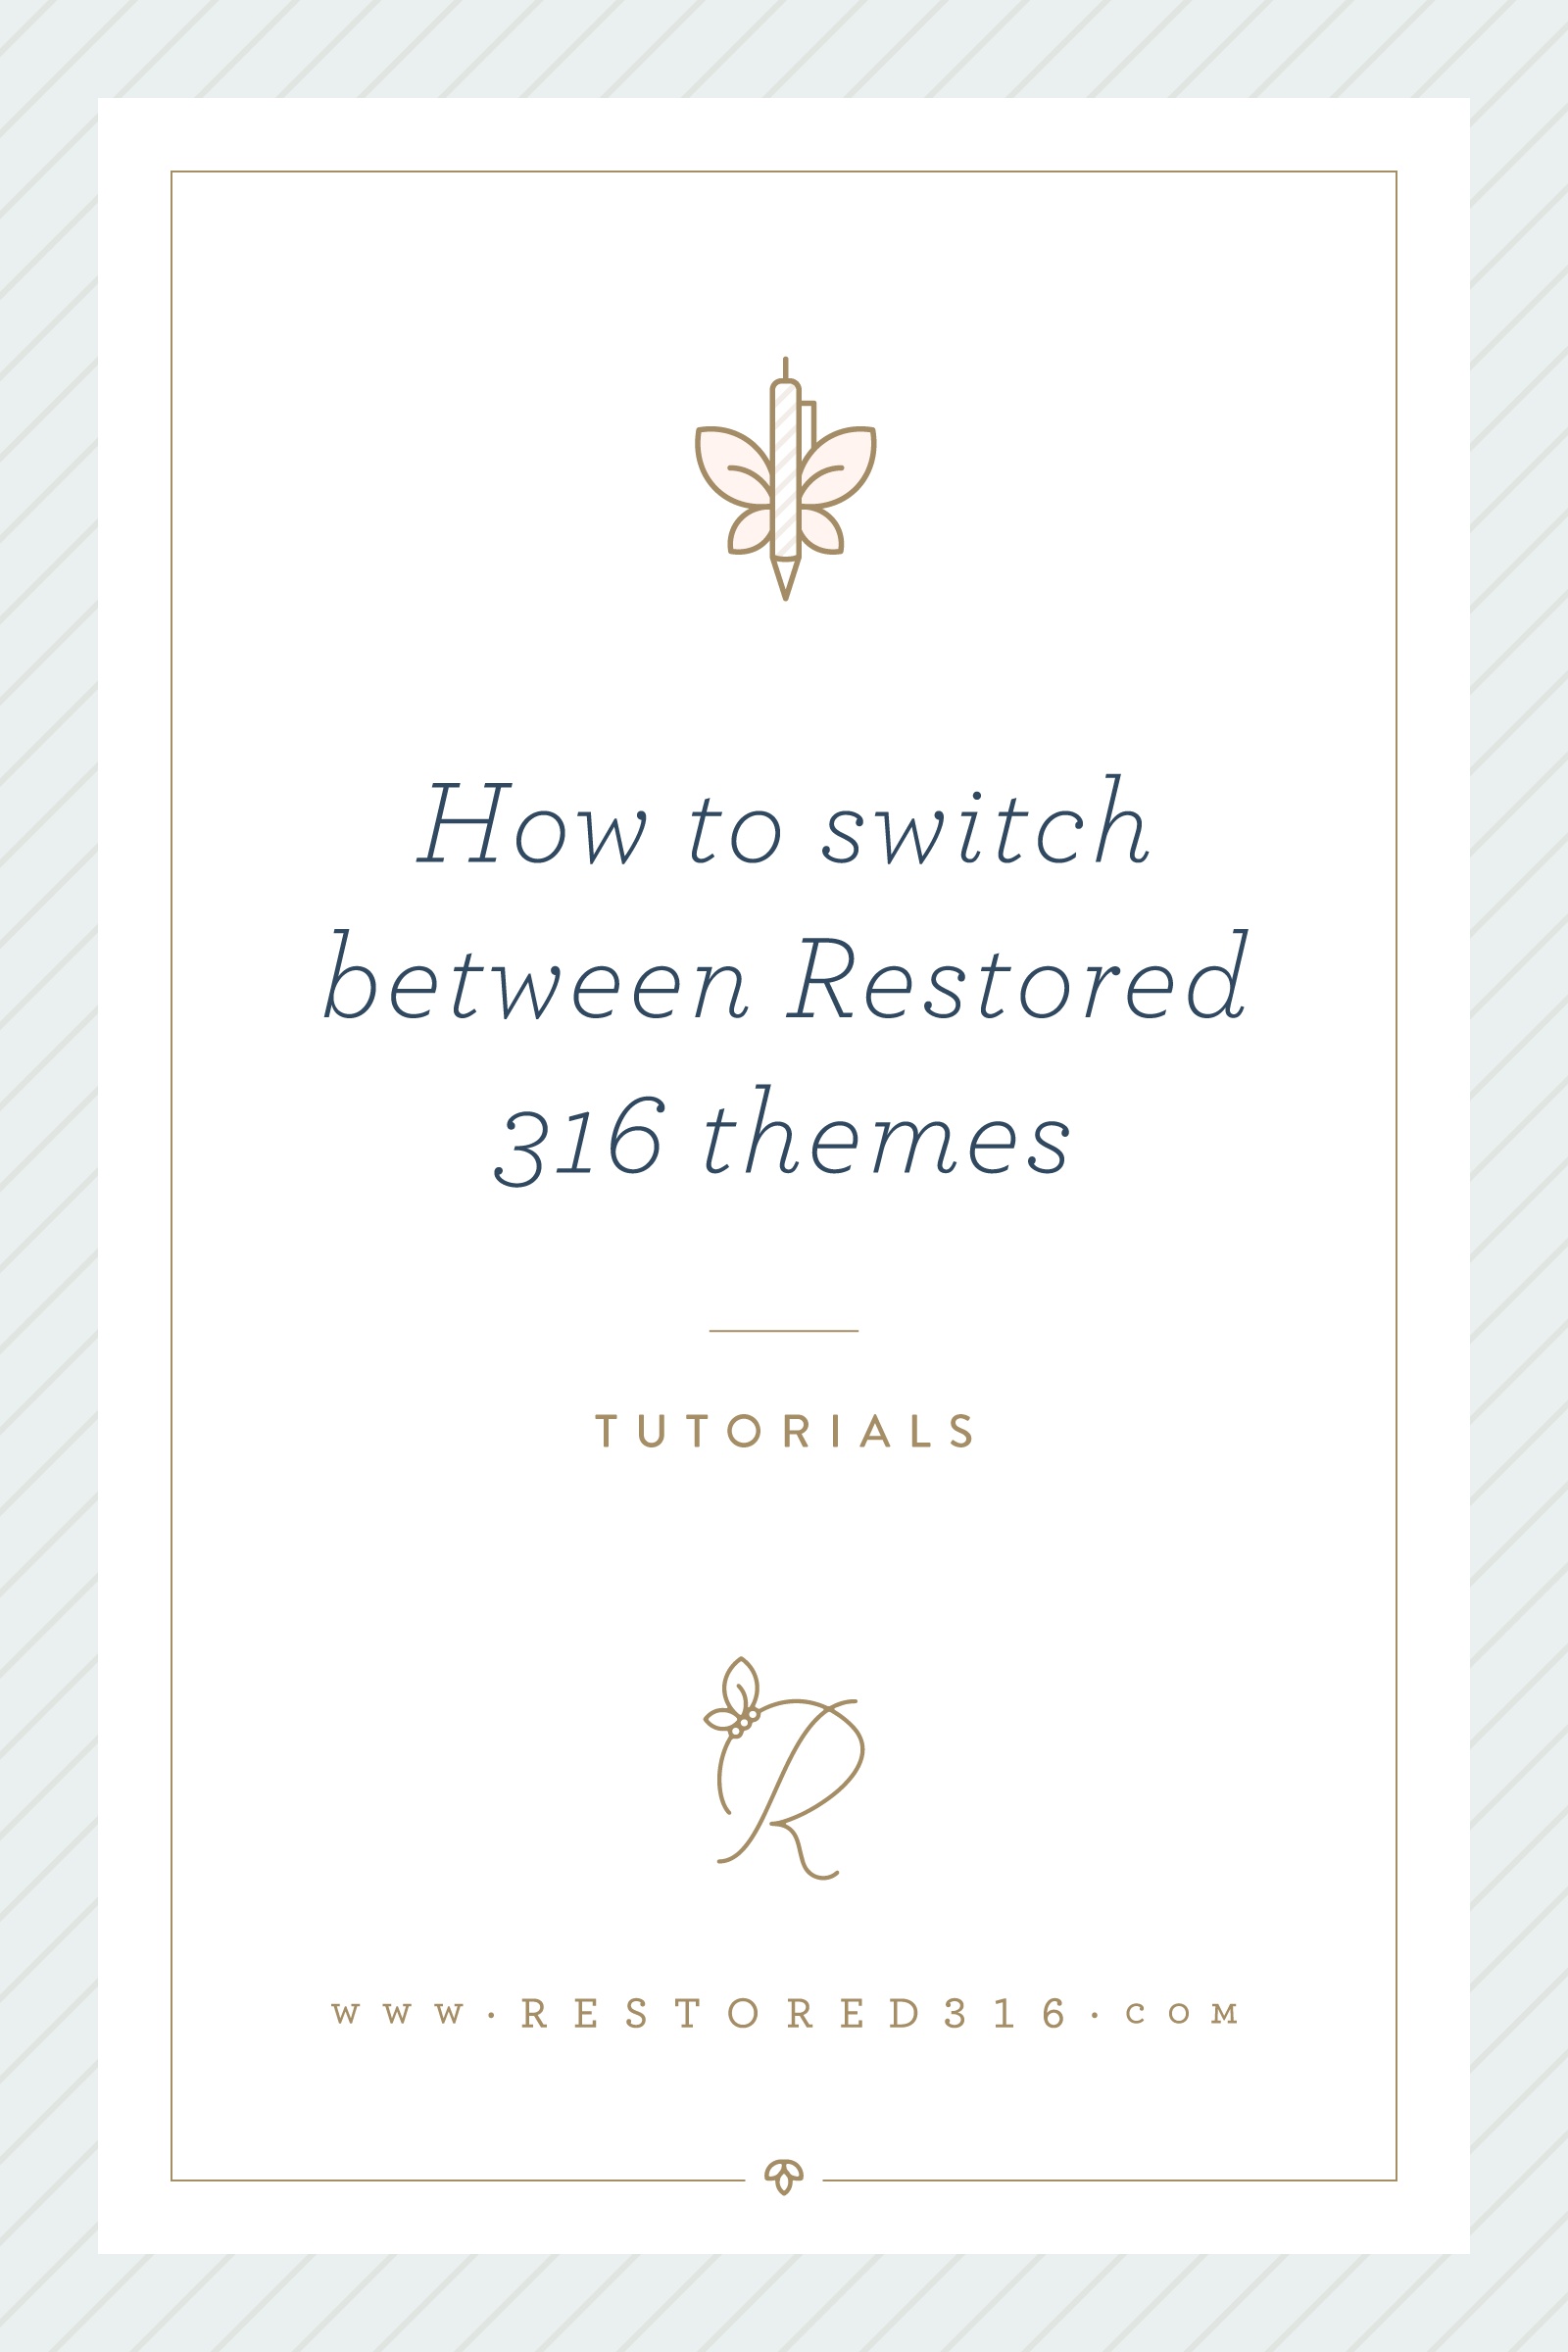 How to switch between Restored 316 themes